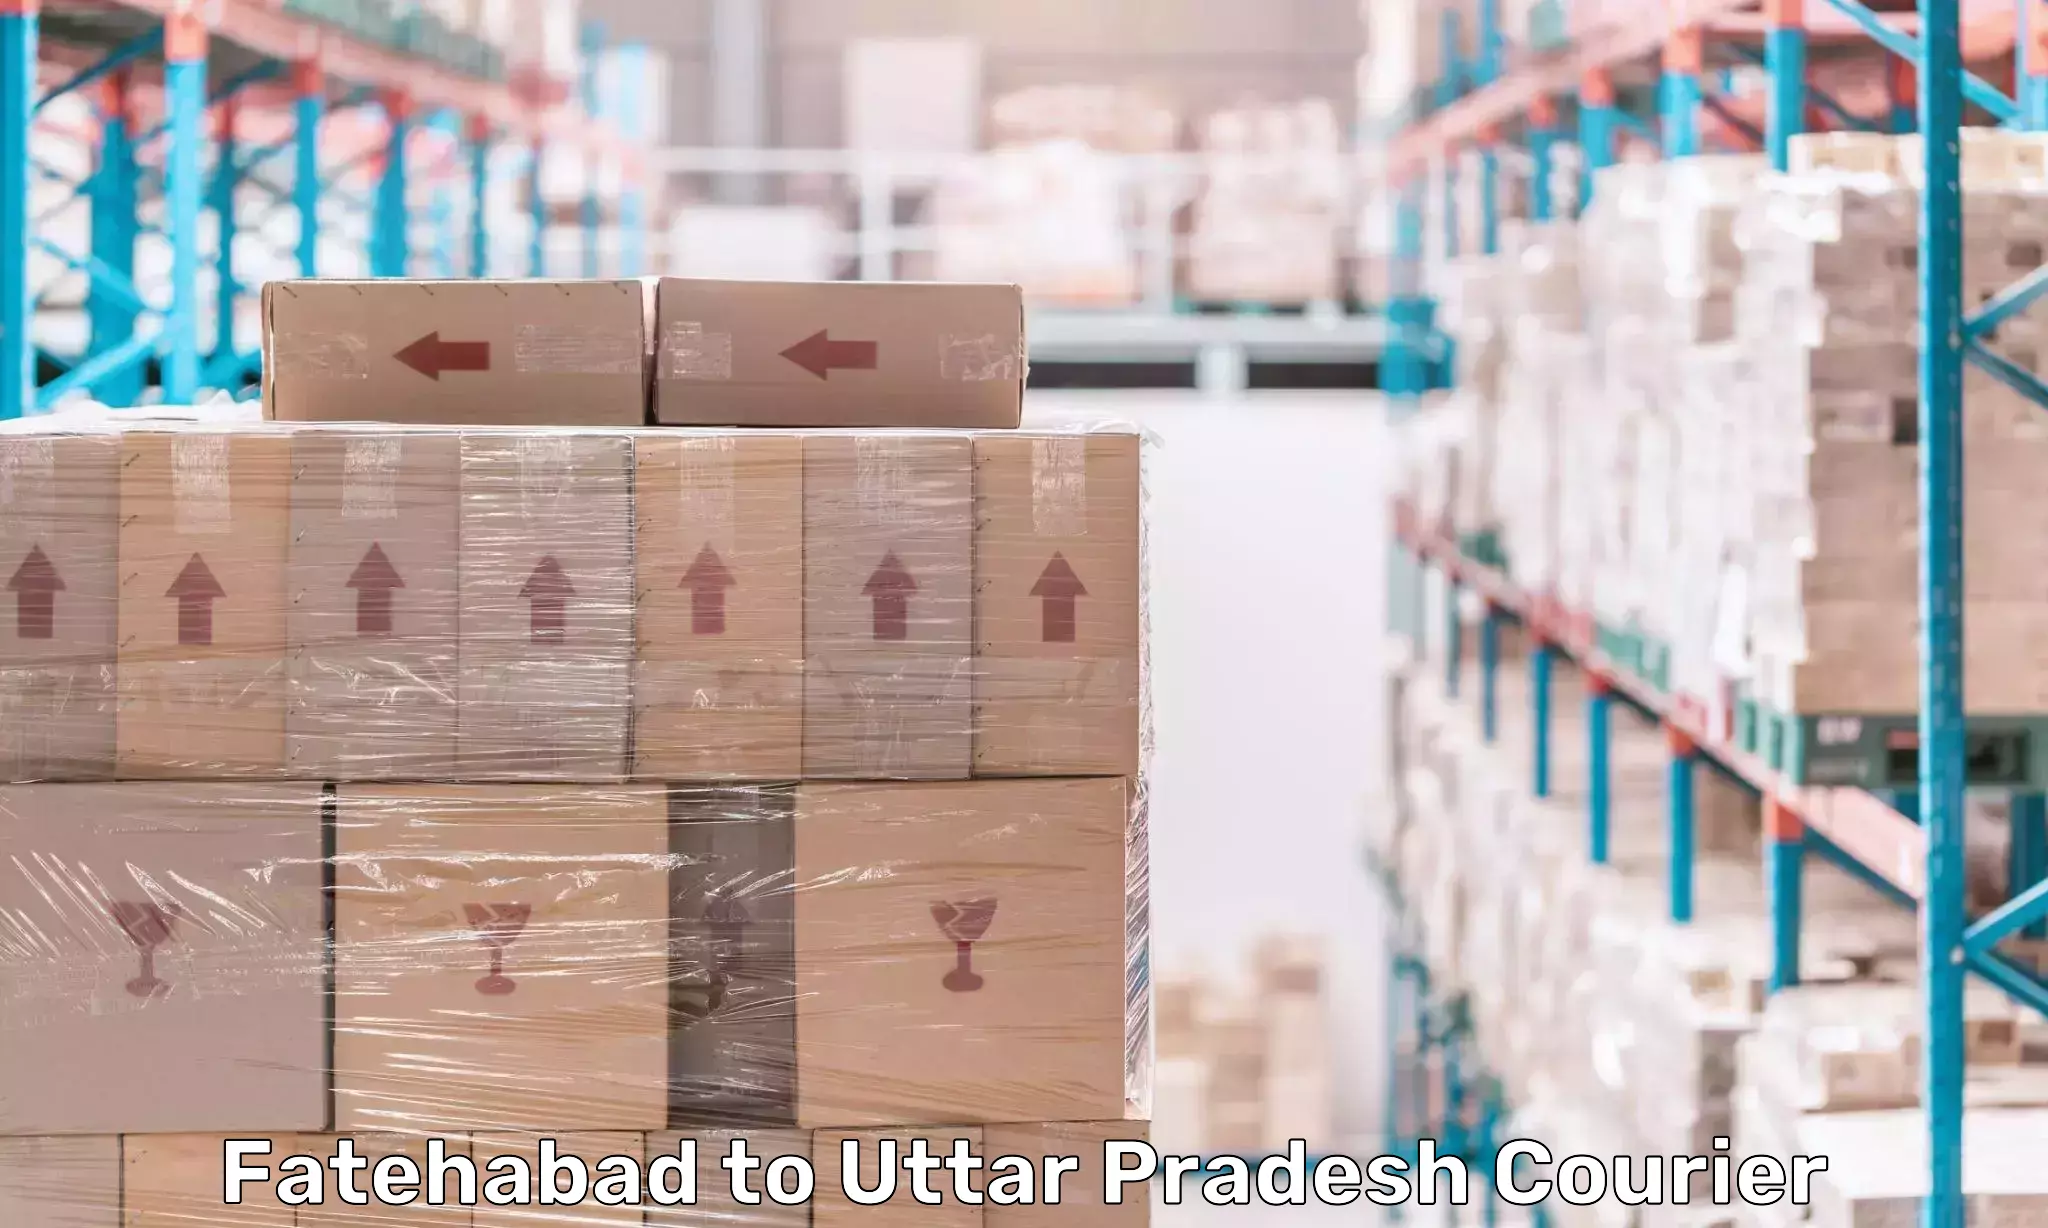 High-capacity parcel service Fatehabad to Unnao